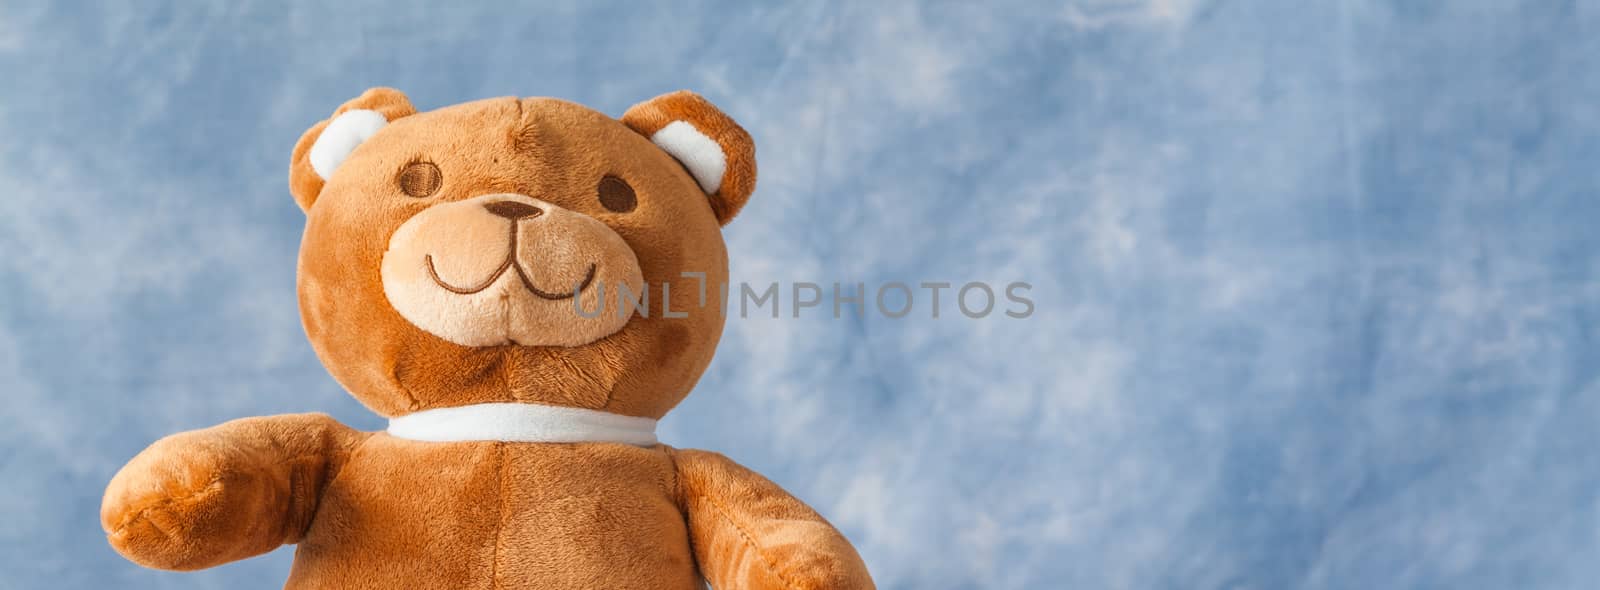 Teddy Bear toy on blue sky background with copyspace